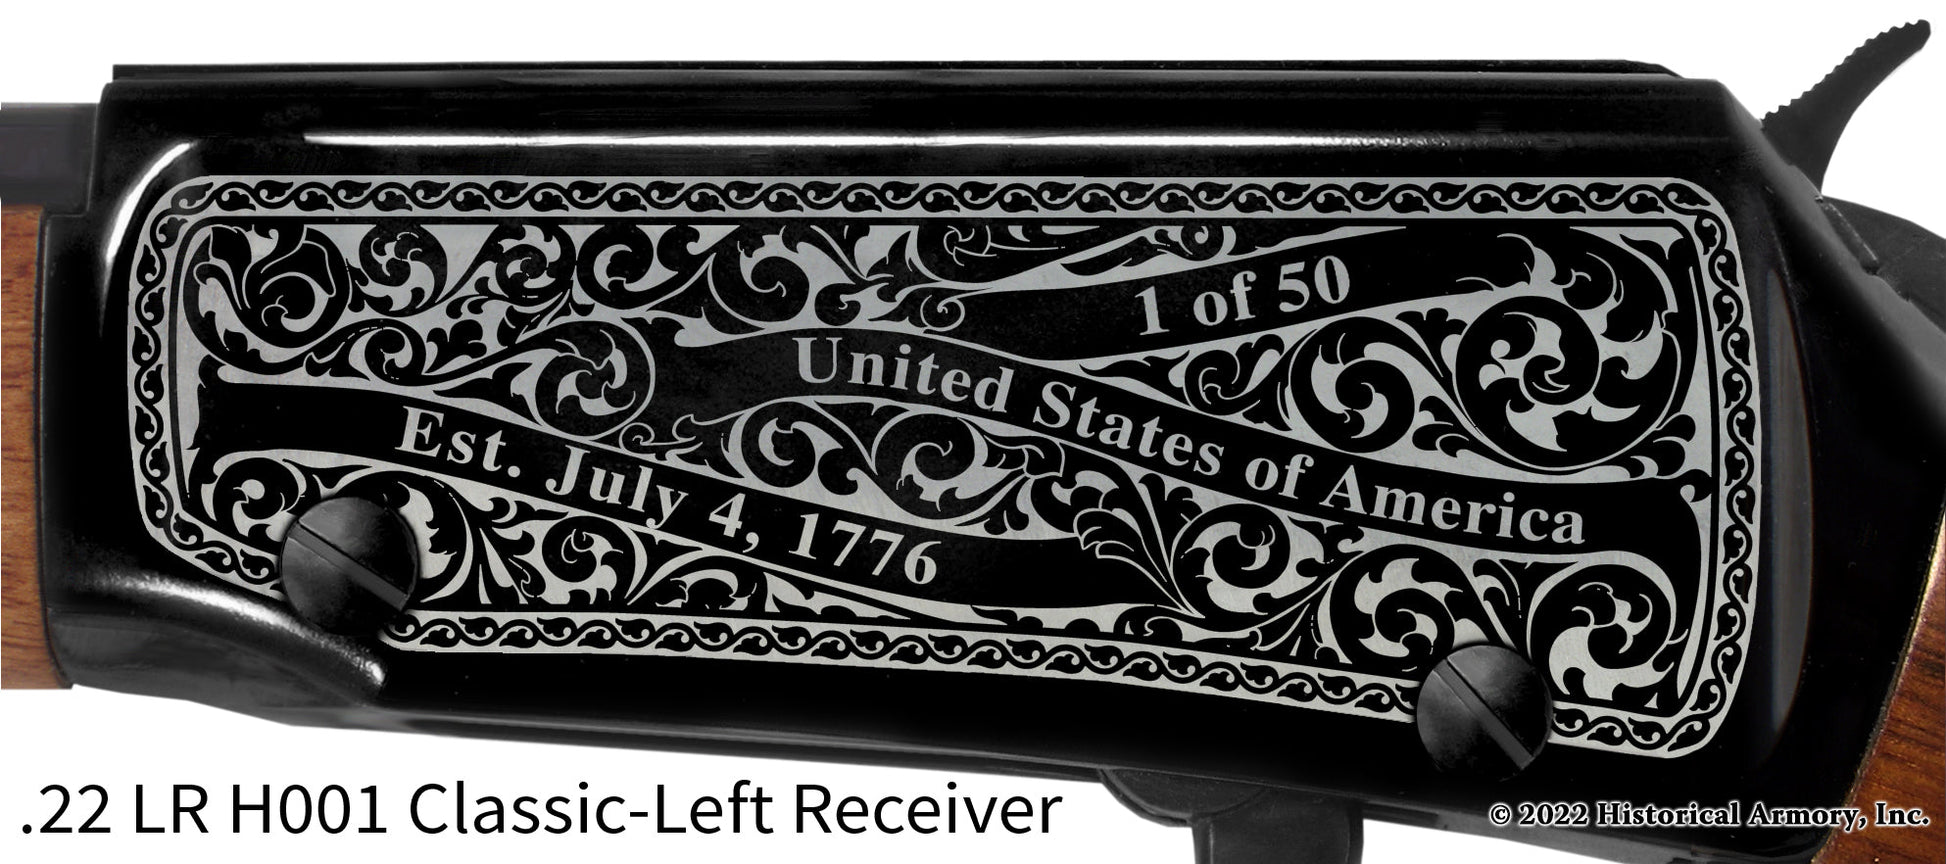 Lafayette County Mississippi Engraved Henry H001 Rifle